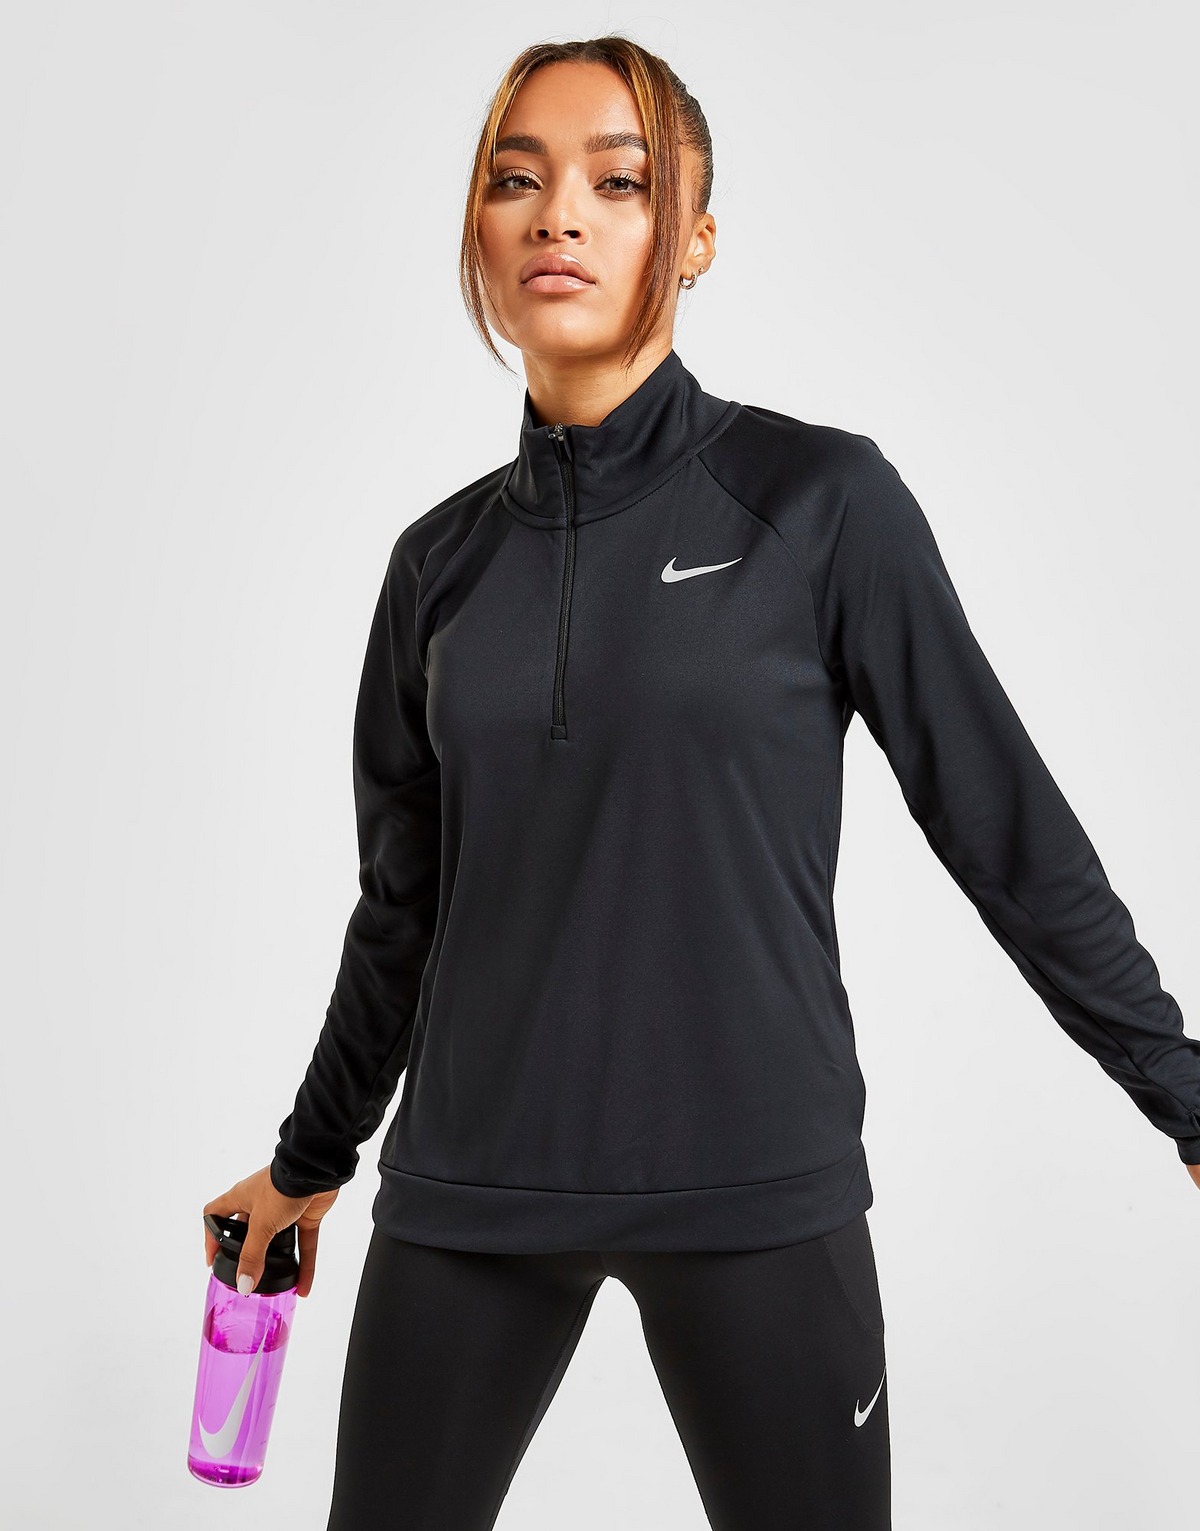 15 modest activewear must-haves to buy now - Beauty and Care